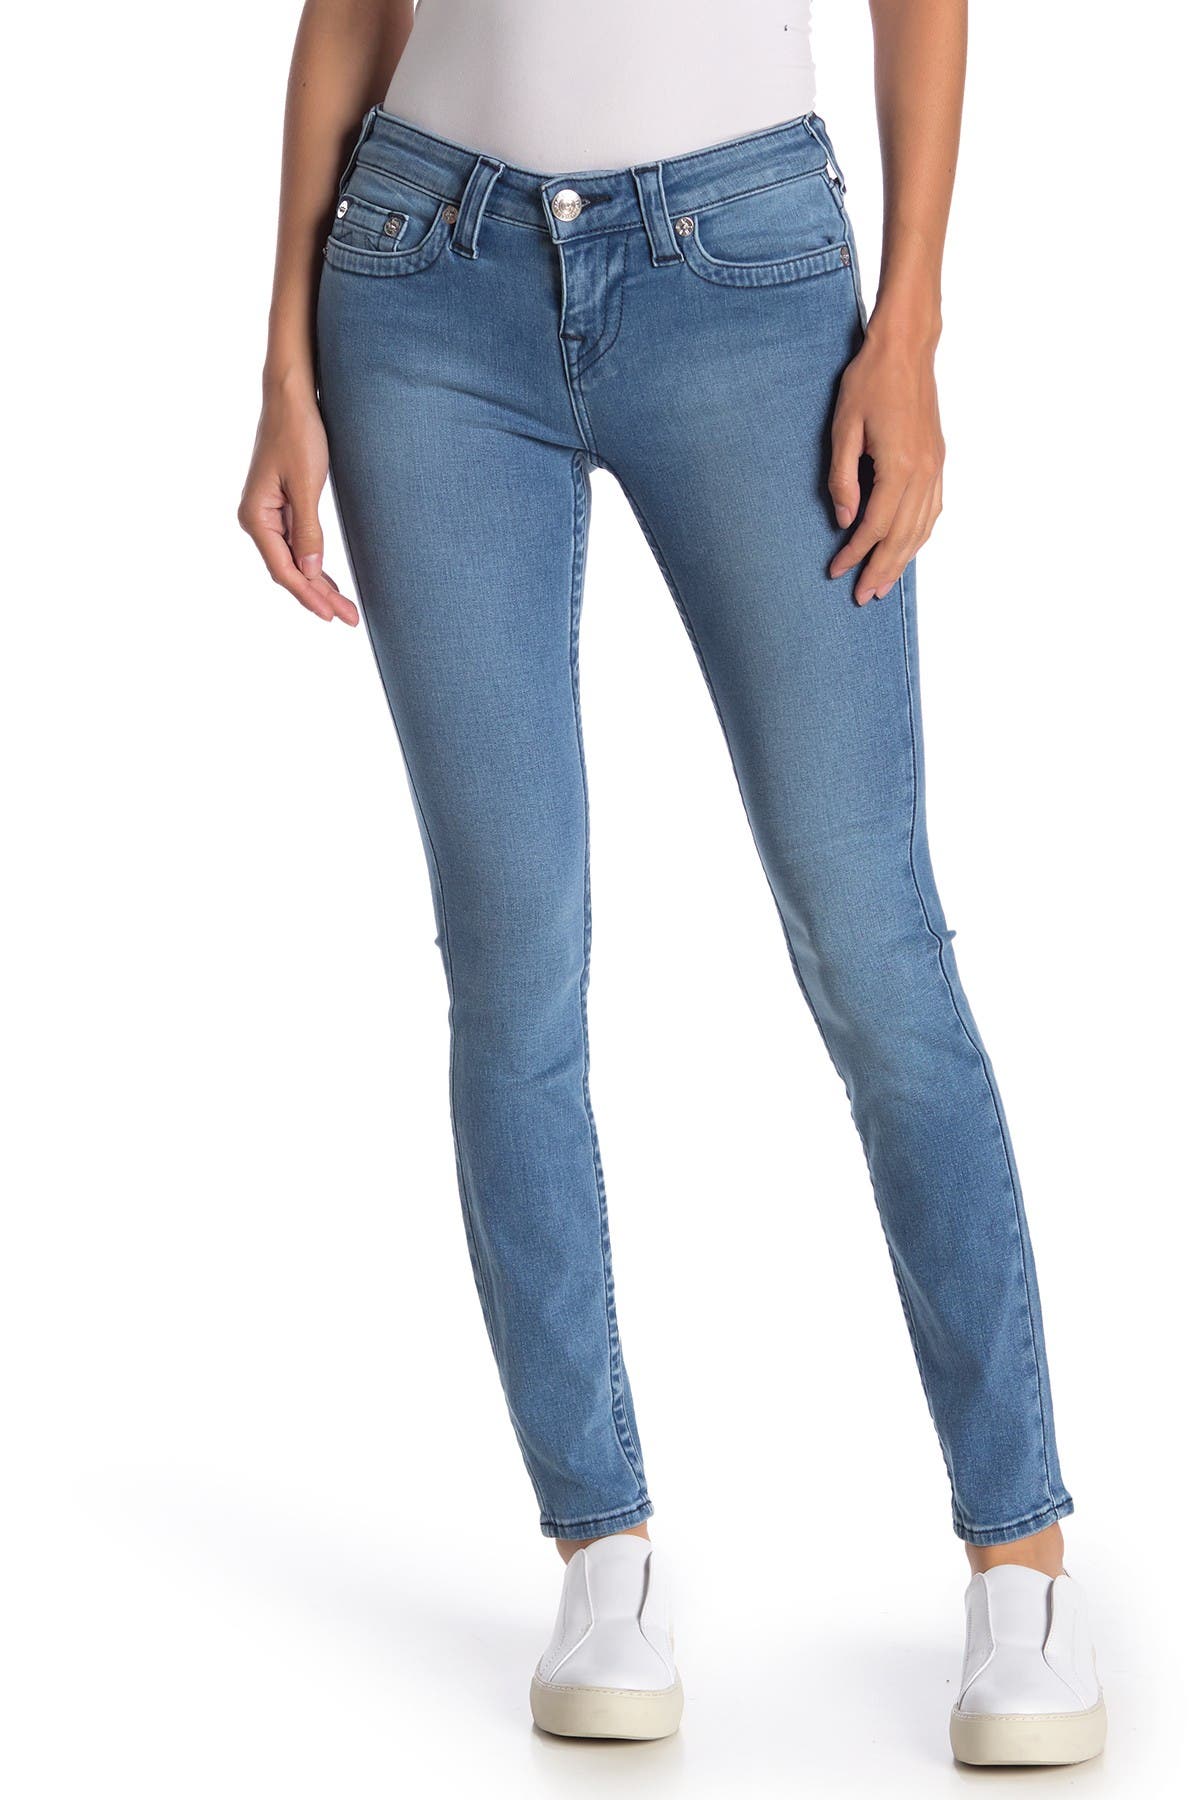 Halle Stretch Mid Rise Skinny Jeans 